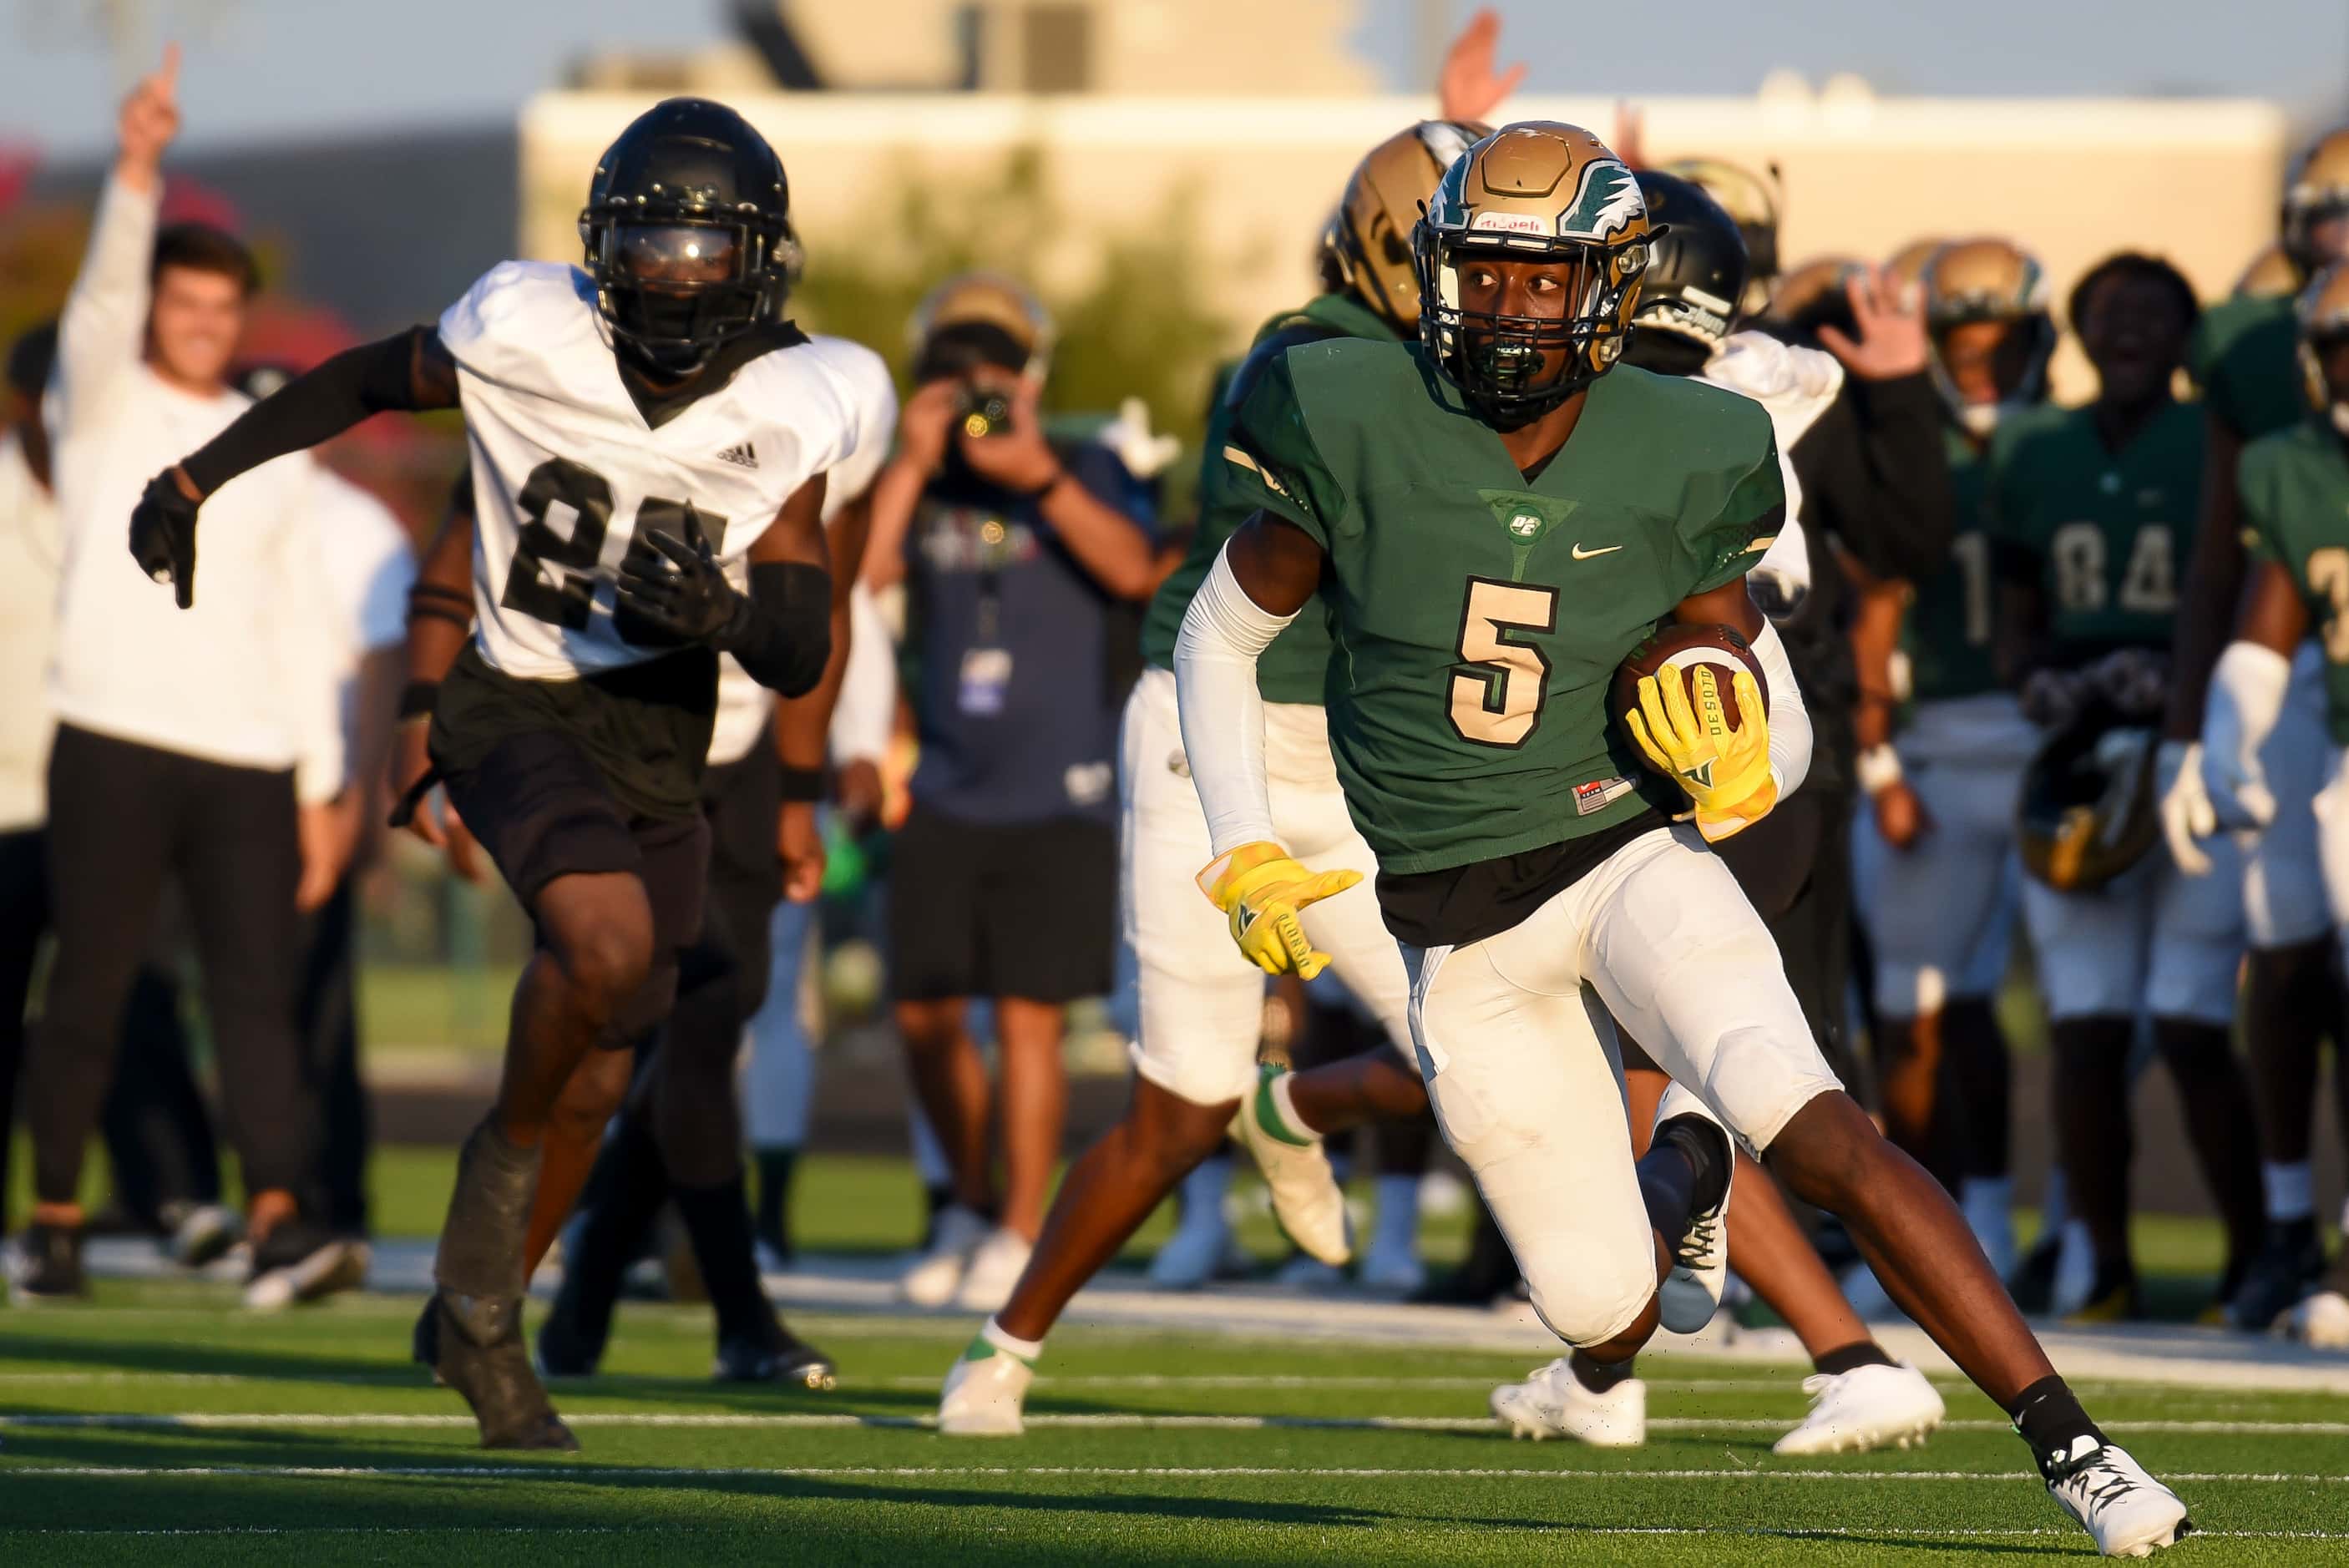 DeSoto senior Tre Wisner (5) runs up the field after catching a pass during DeSoto’s home...